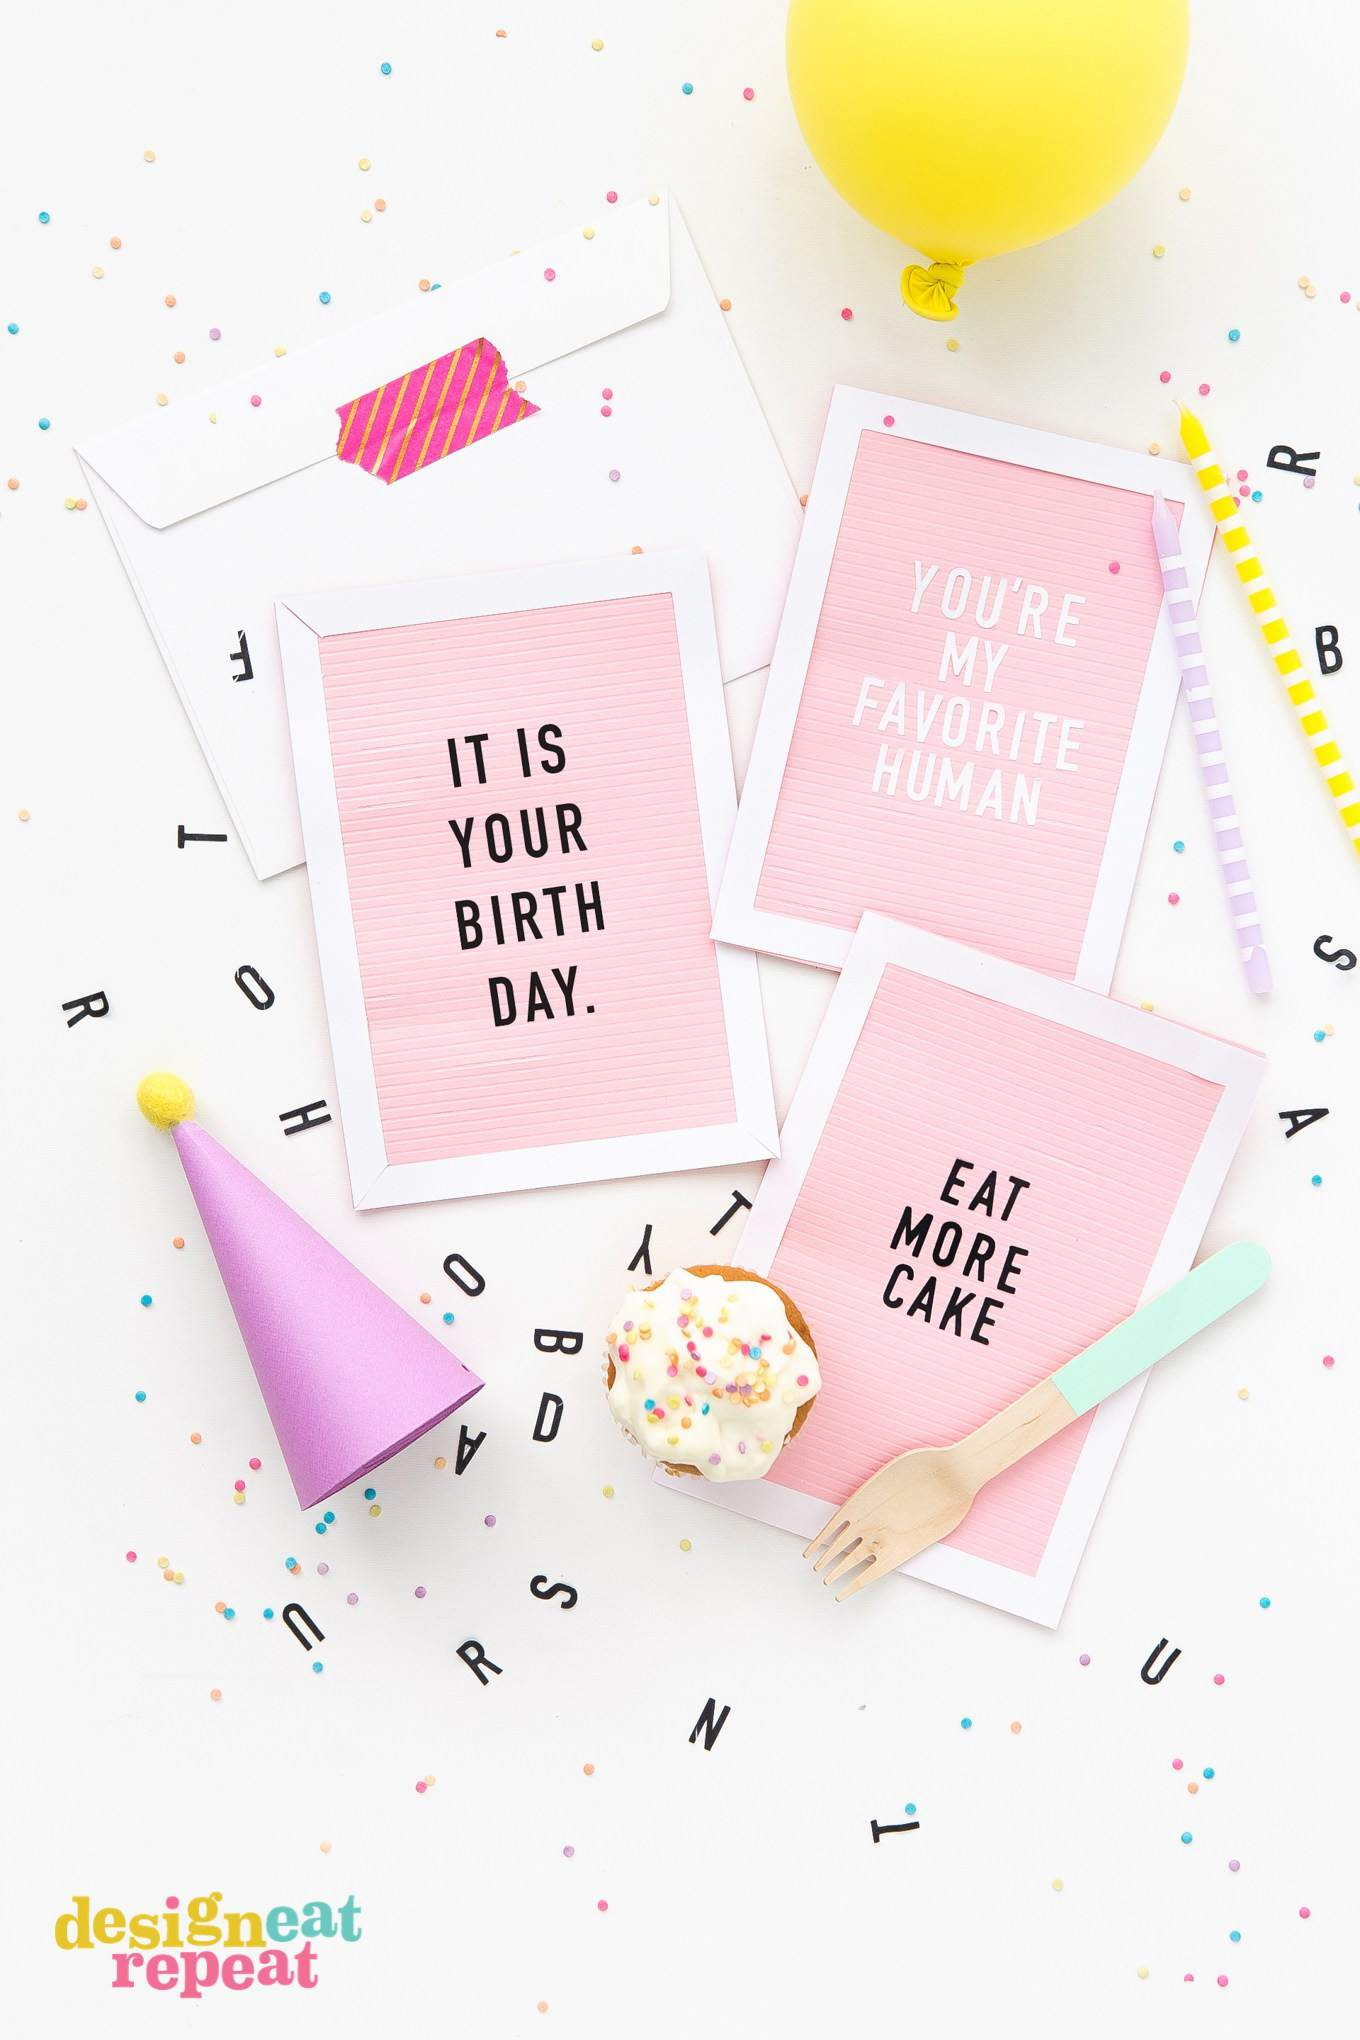 Cute Birthday Card Ideas For Dad Get Inspiration From 25 Of The Best Diy Birthday Cards